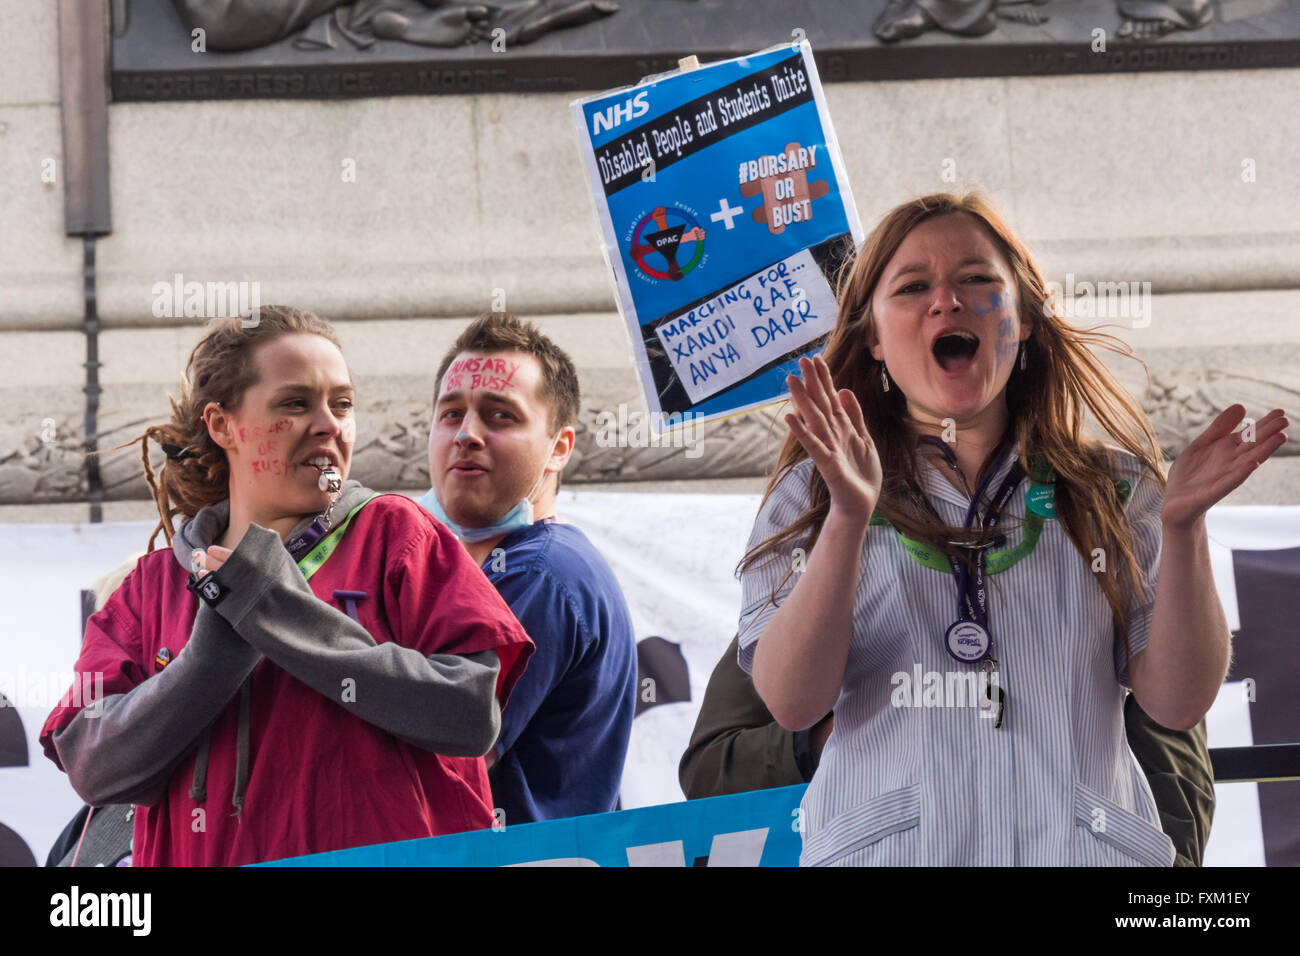 London, UK. 16th April, 2016. Student nurses from the Bursary or Bust campaign including Danielle Tiplady (right) applaud as a junior doctor speaiks  at the Trafalgar Square rally after the Peoples Assembly Against Austerity march demanding an end to privatisation of the NHS, secure homes for all, rent control and an end to attacks on social housing, an end to insecure jobs and the scrapping of the Trade Union Bill, tuition fees and the marketisation of education.  Peter Marshall/Alamy Live News Stock Photo